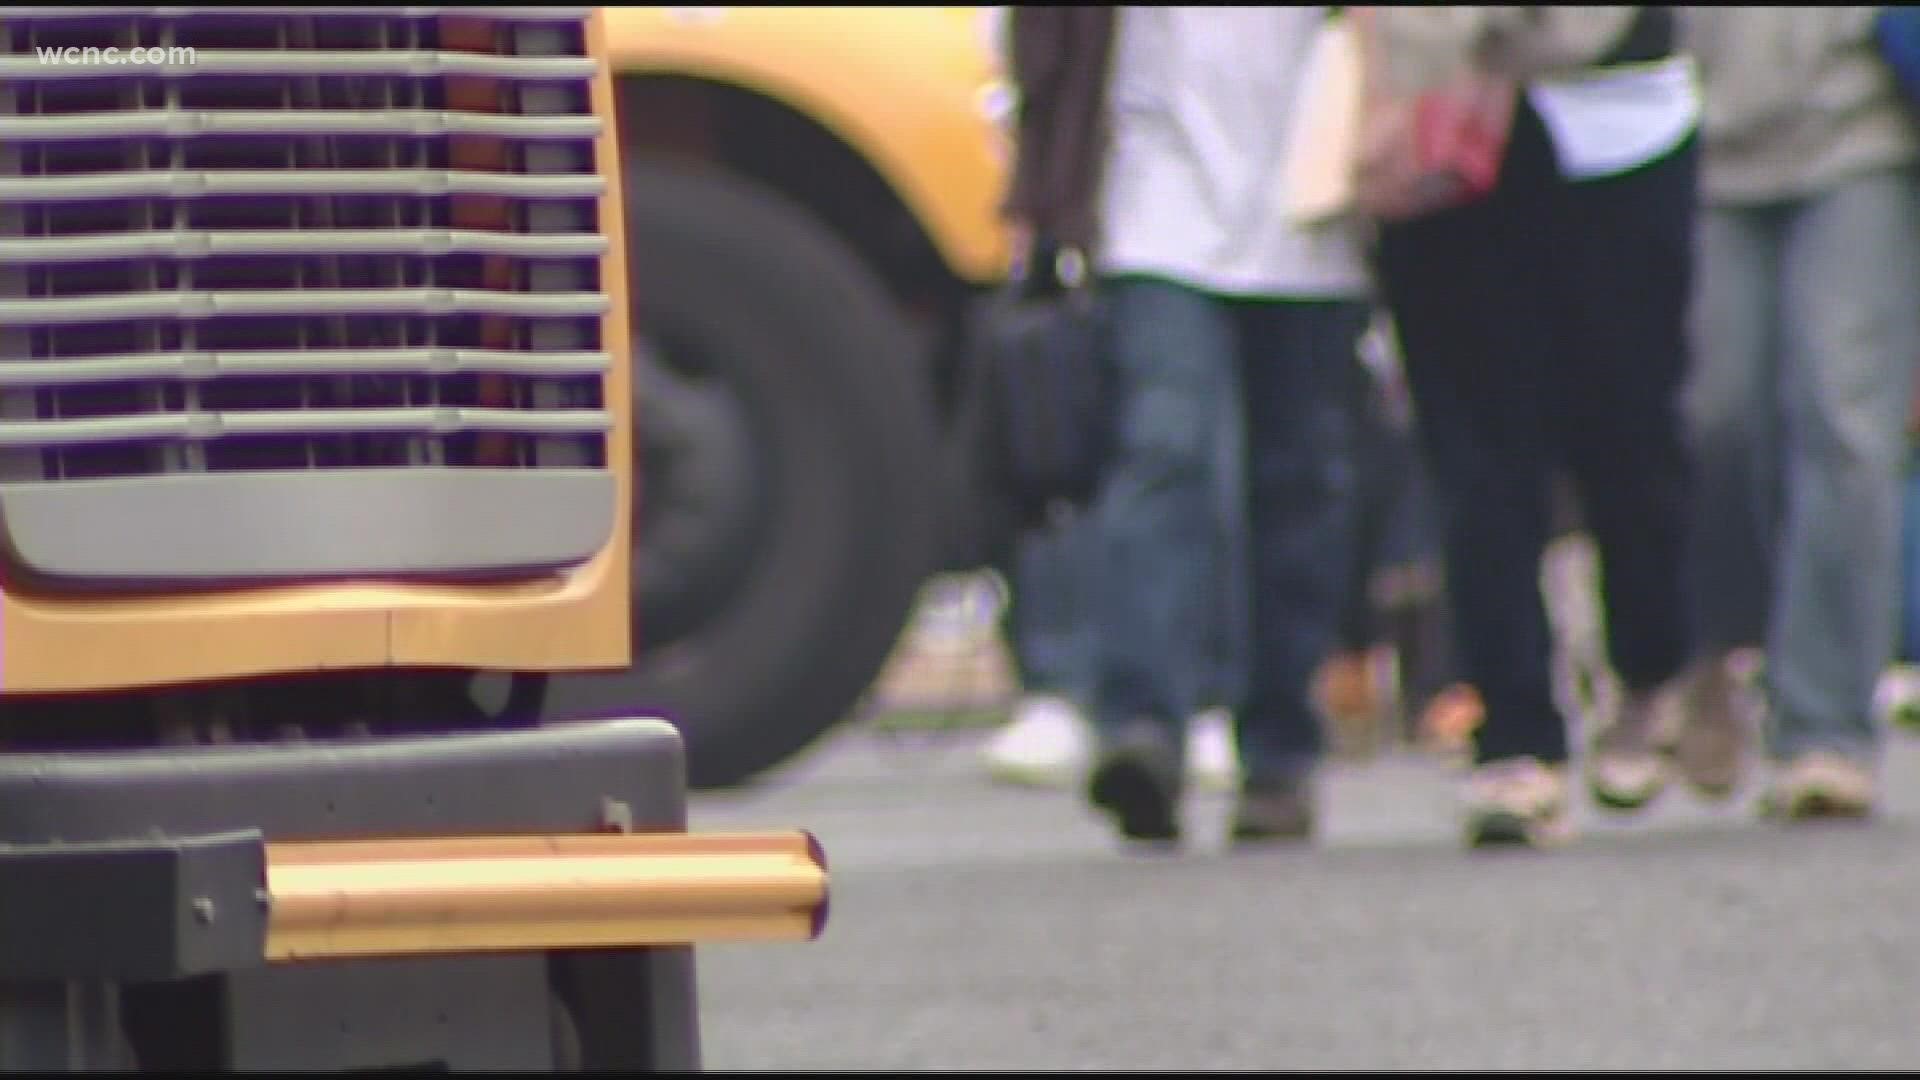 WCNC Charlotte found starting pay in Chesterfield County is just $10.48 an hour, almost $7 less than what Charlotte-Mecklenburg Schools is offering new bus drivers.